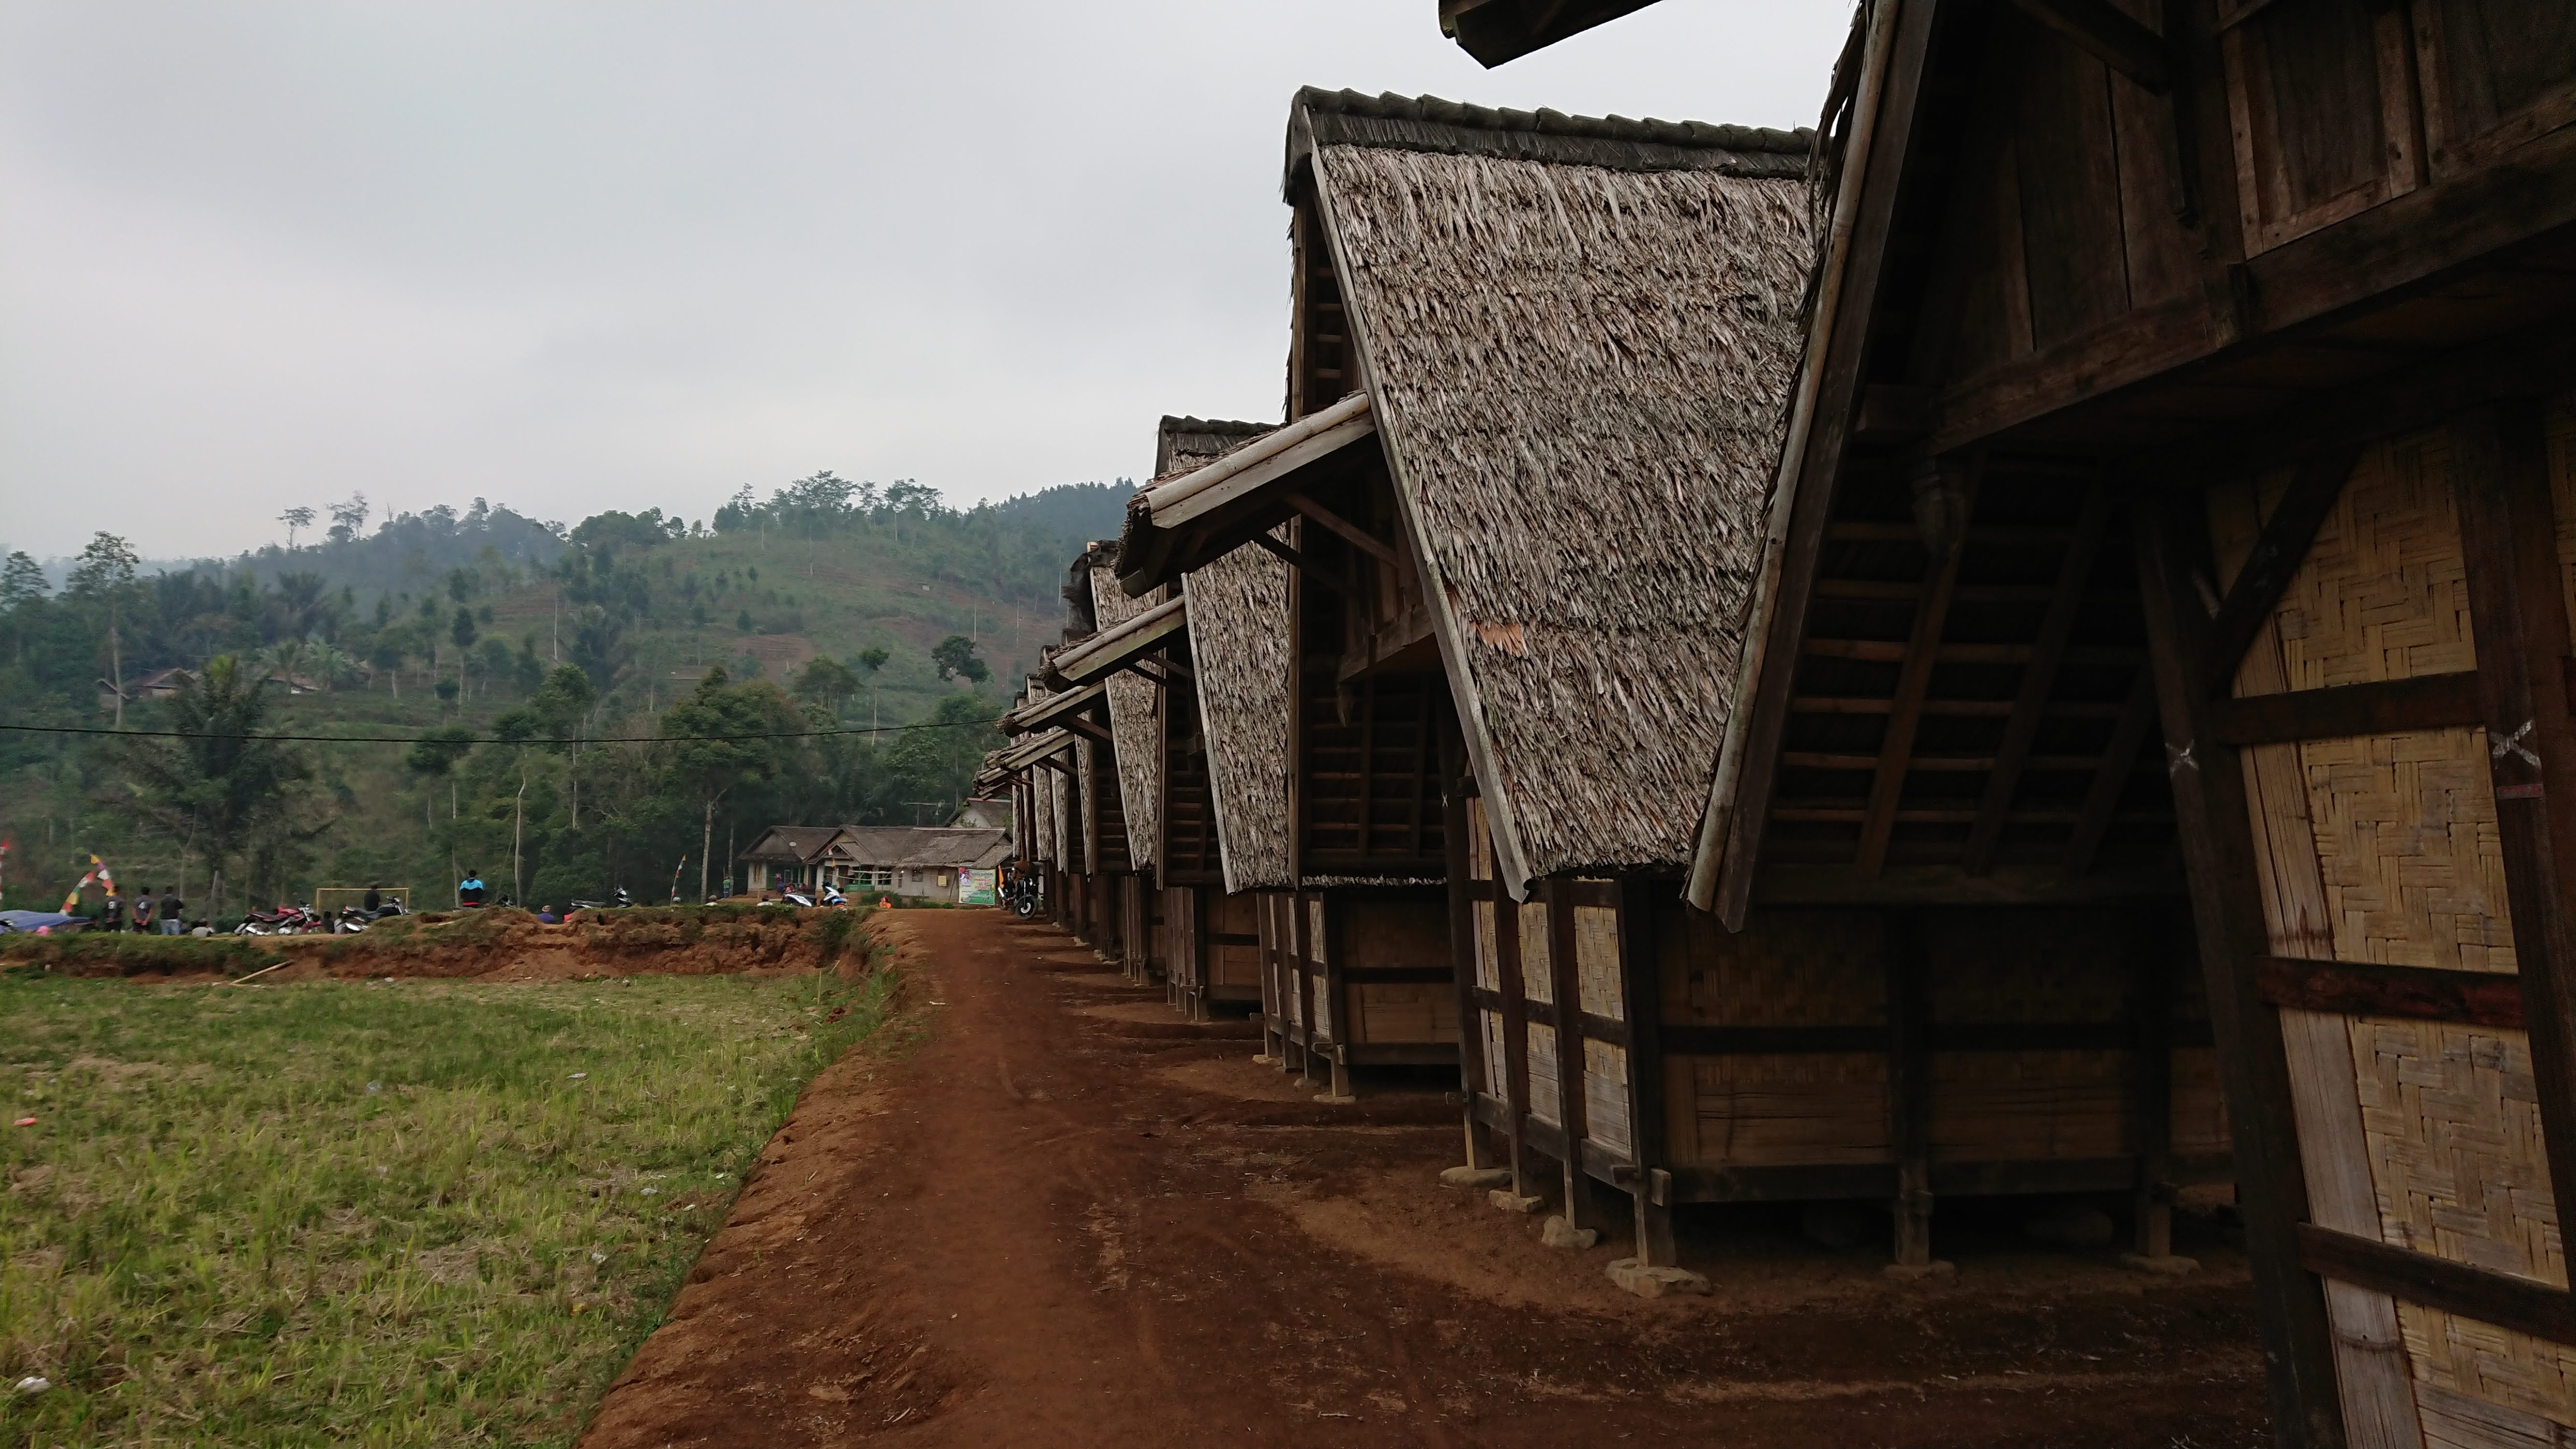 Traditional home for storing rice